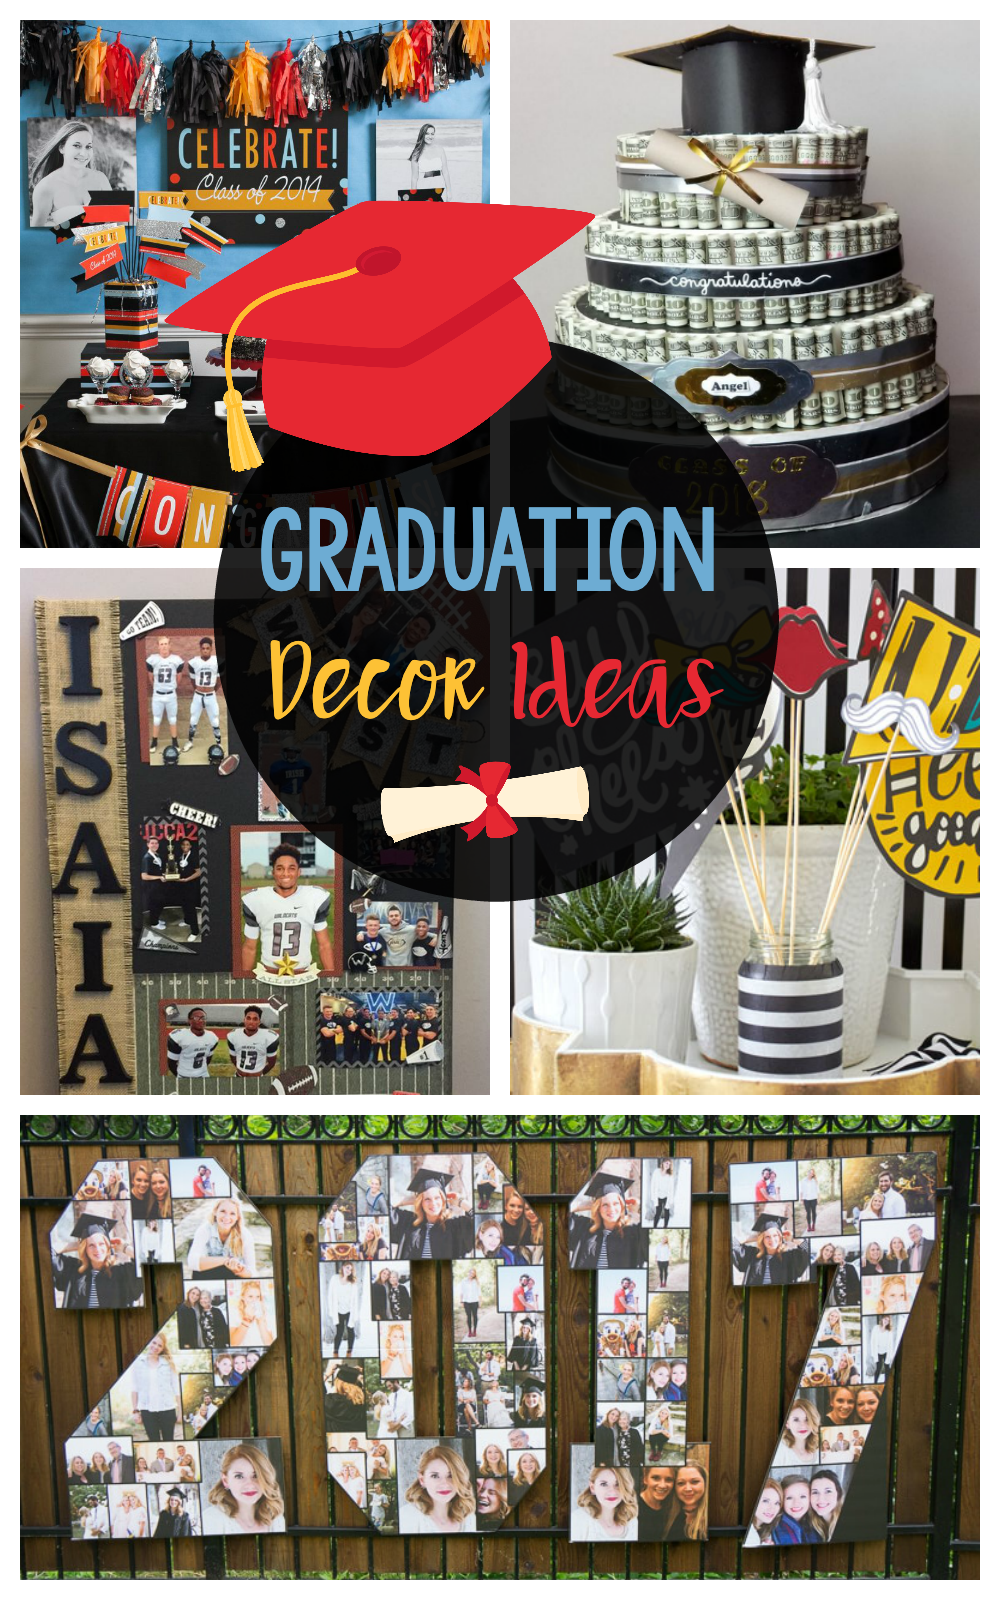 DIY Graduation Decorations and Ideas-Fun centerpieces, banners, and photo memory boards for your graduation party! #graduation #gradparty #graddecor